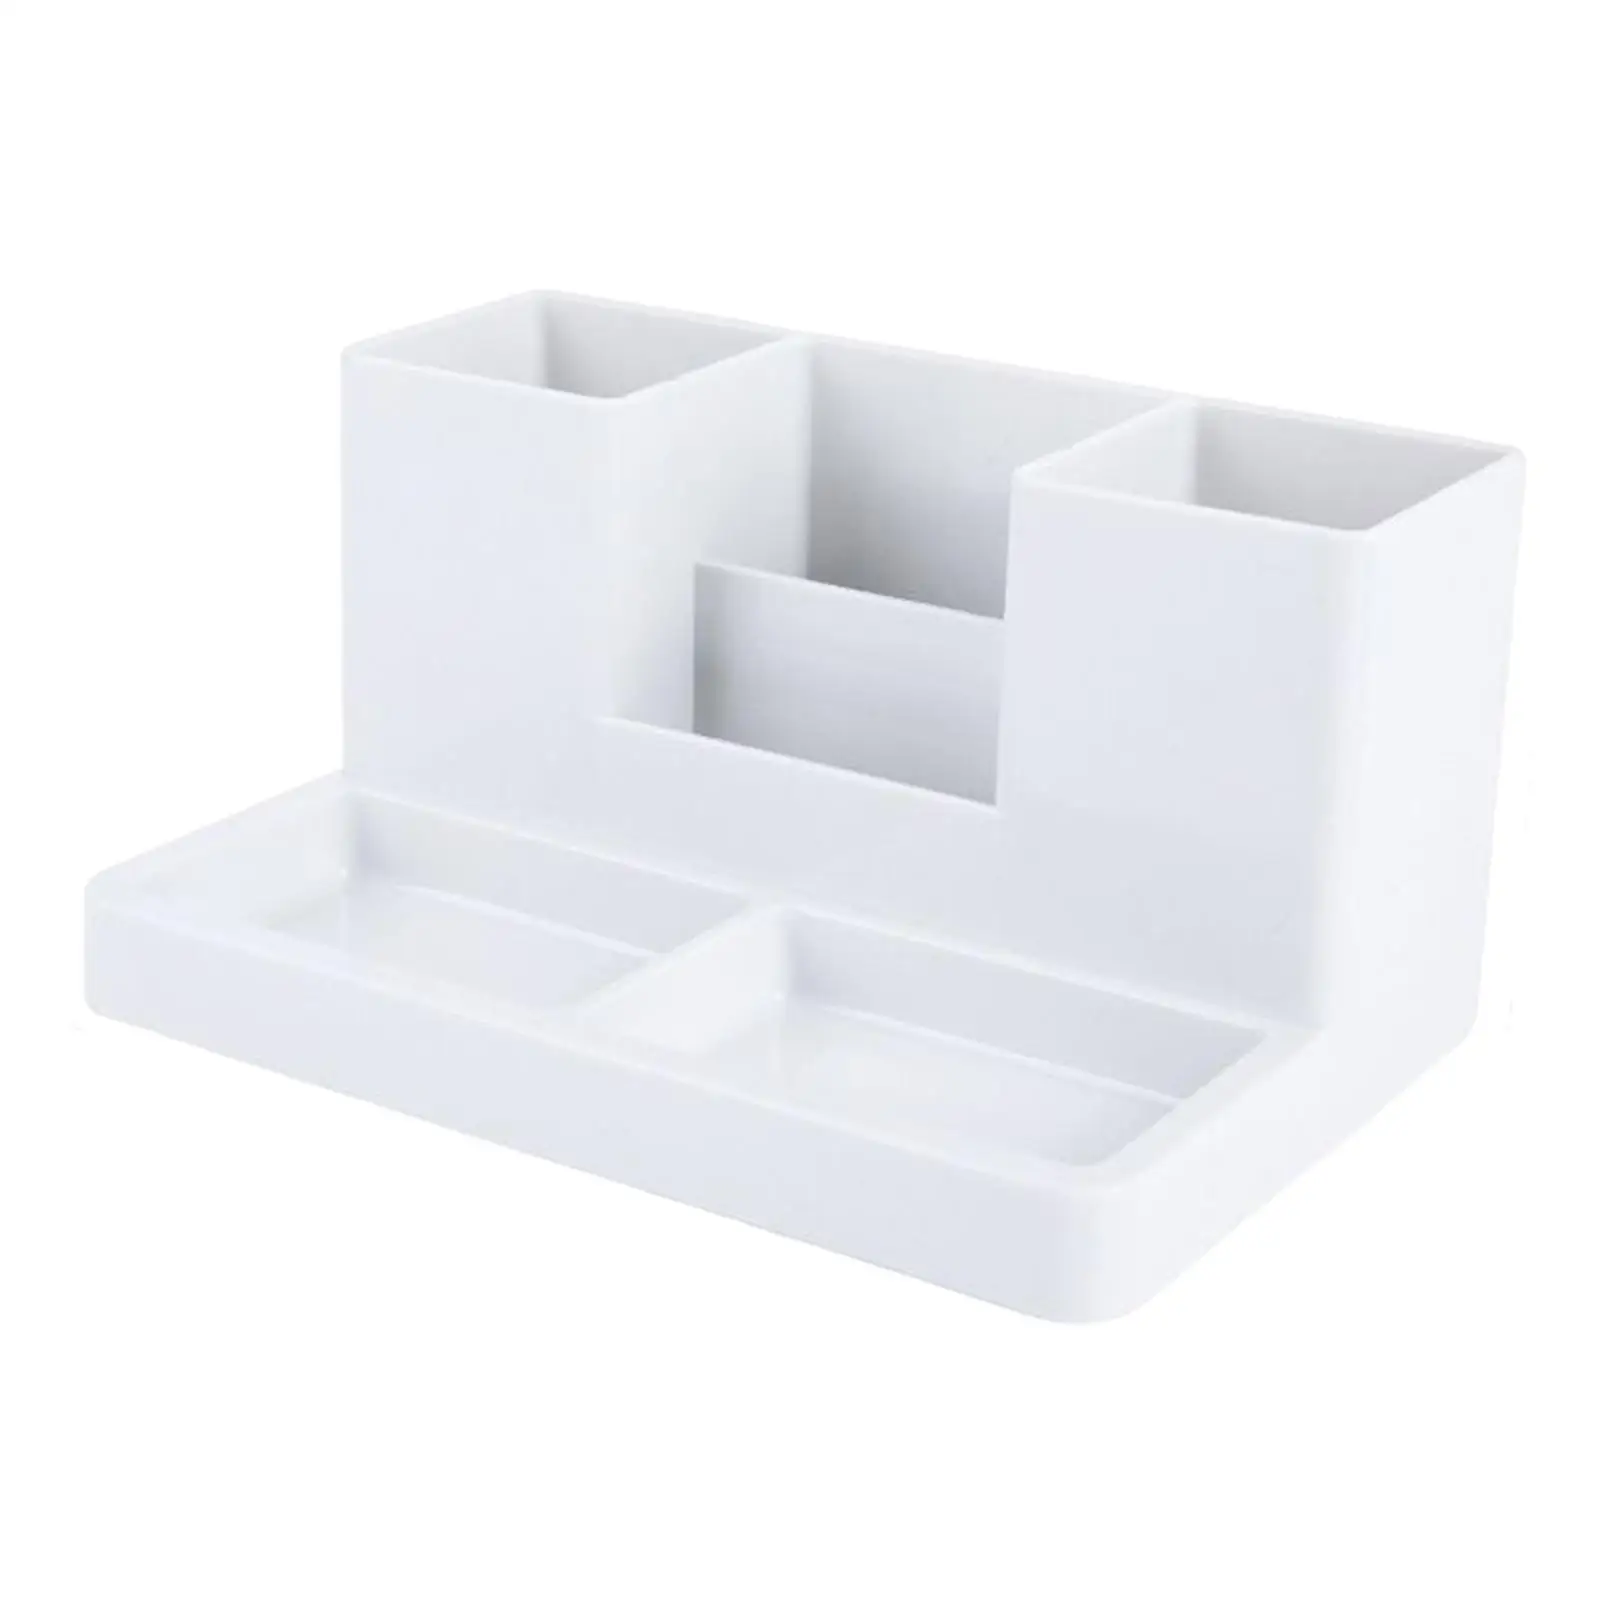 Cosmetic Storage Box Business Card/Pen/Pencil Holder Storage Box Office Accessories Caddy Desktop Organizer with Pencil Holders